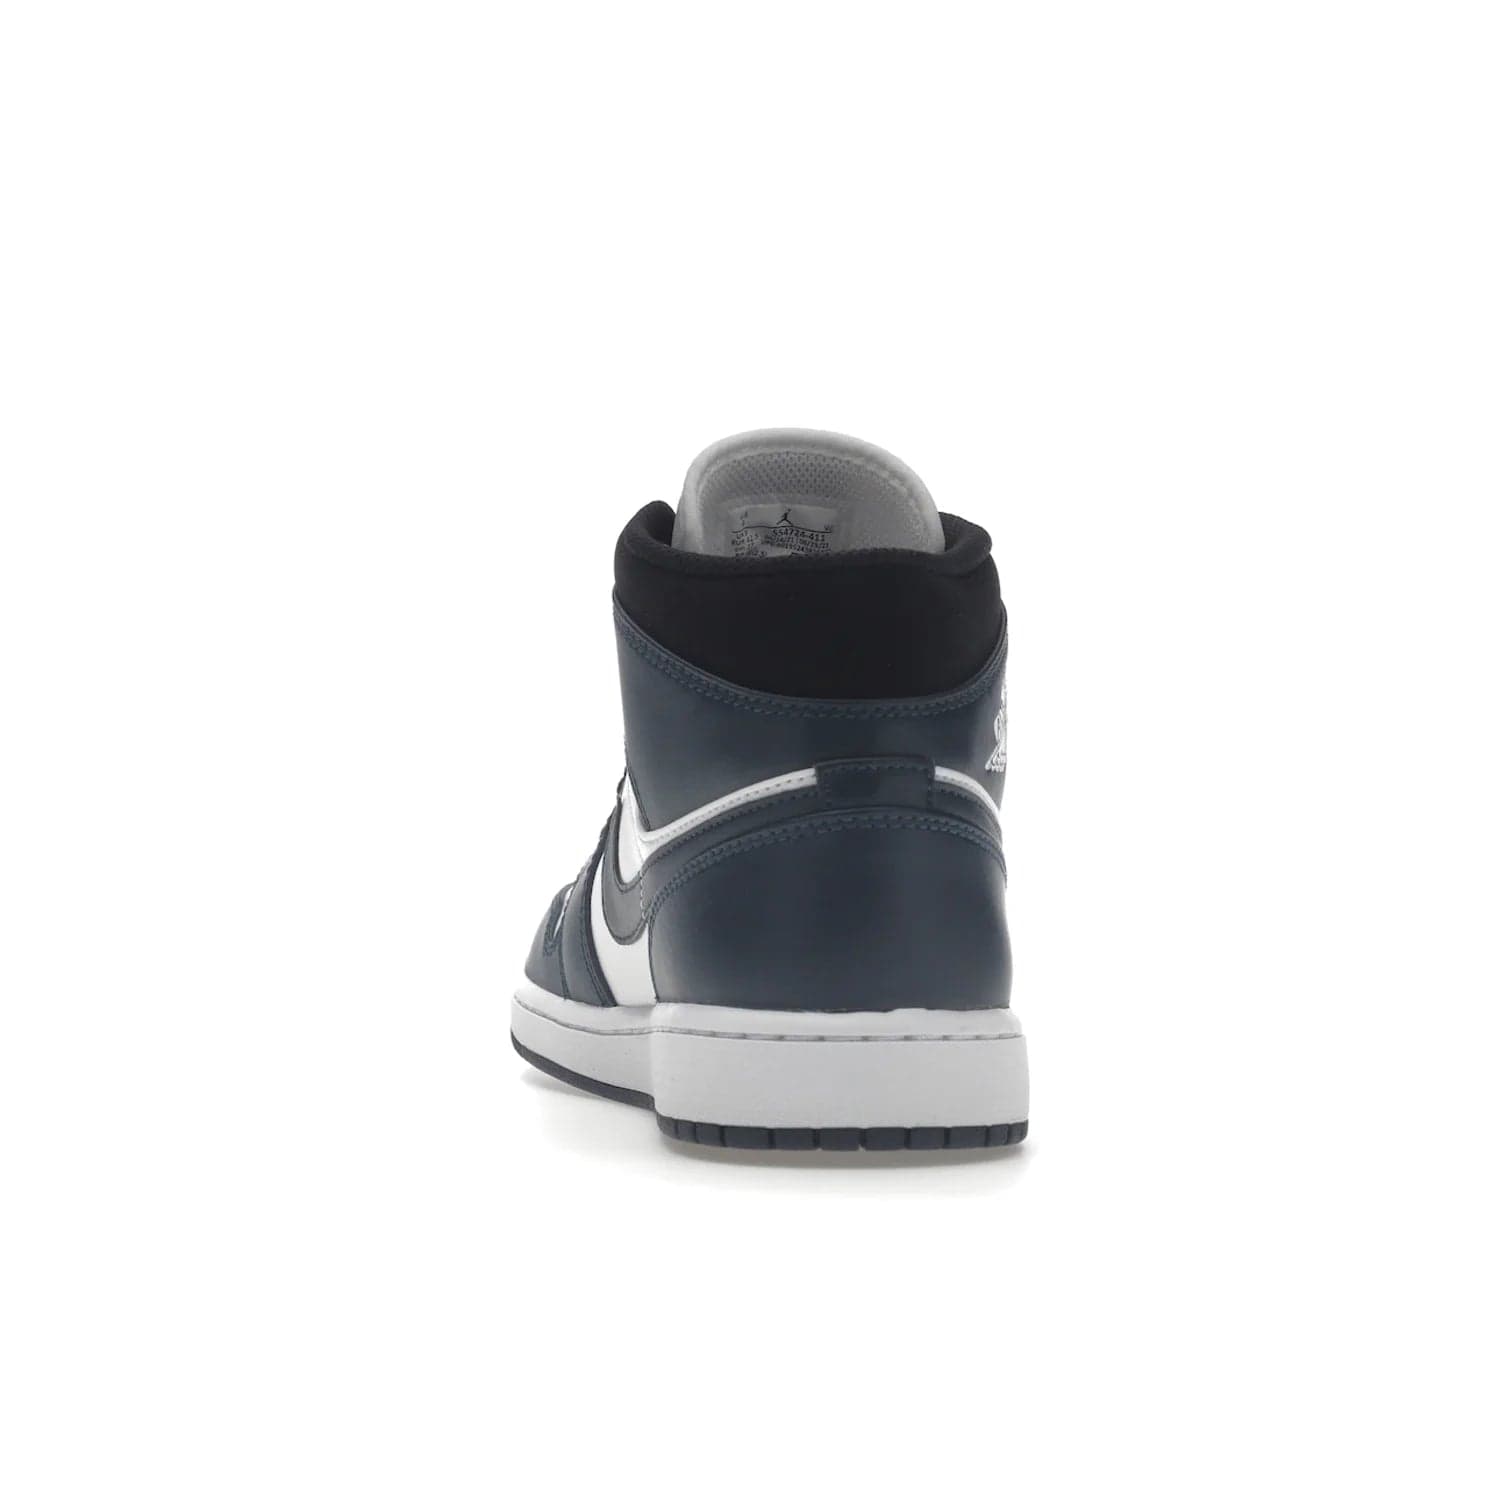 Jordan 1 Mid Armory Navy - Image 27 - Only at www.BallersClubKickz.com - The Jordan 1 Mid Armory Navy: classic basketball sneaker with soft white leather upper, deep navy blue overlays, and black leather ankle detailing. Iconic style with Jordan Wings logo and Jumpman label.